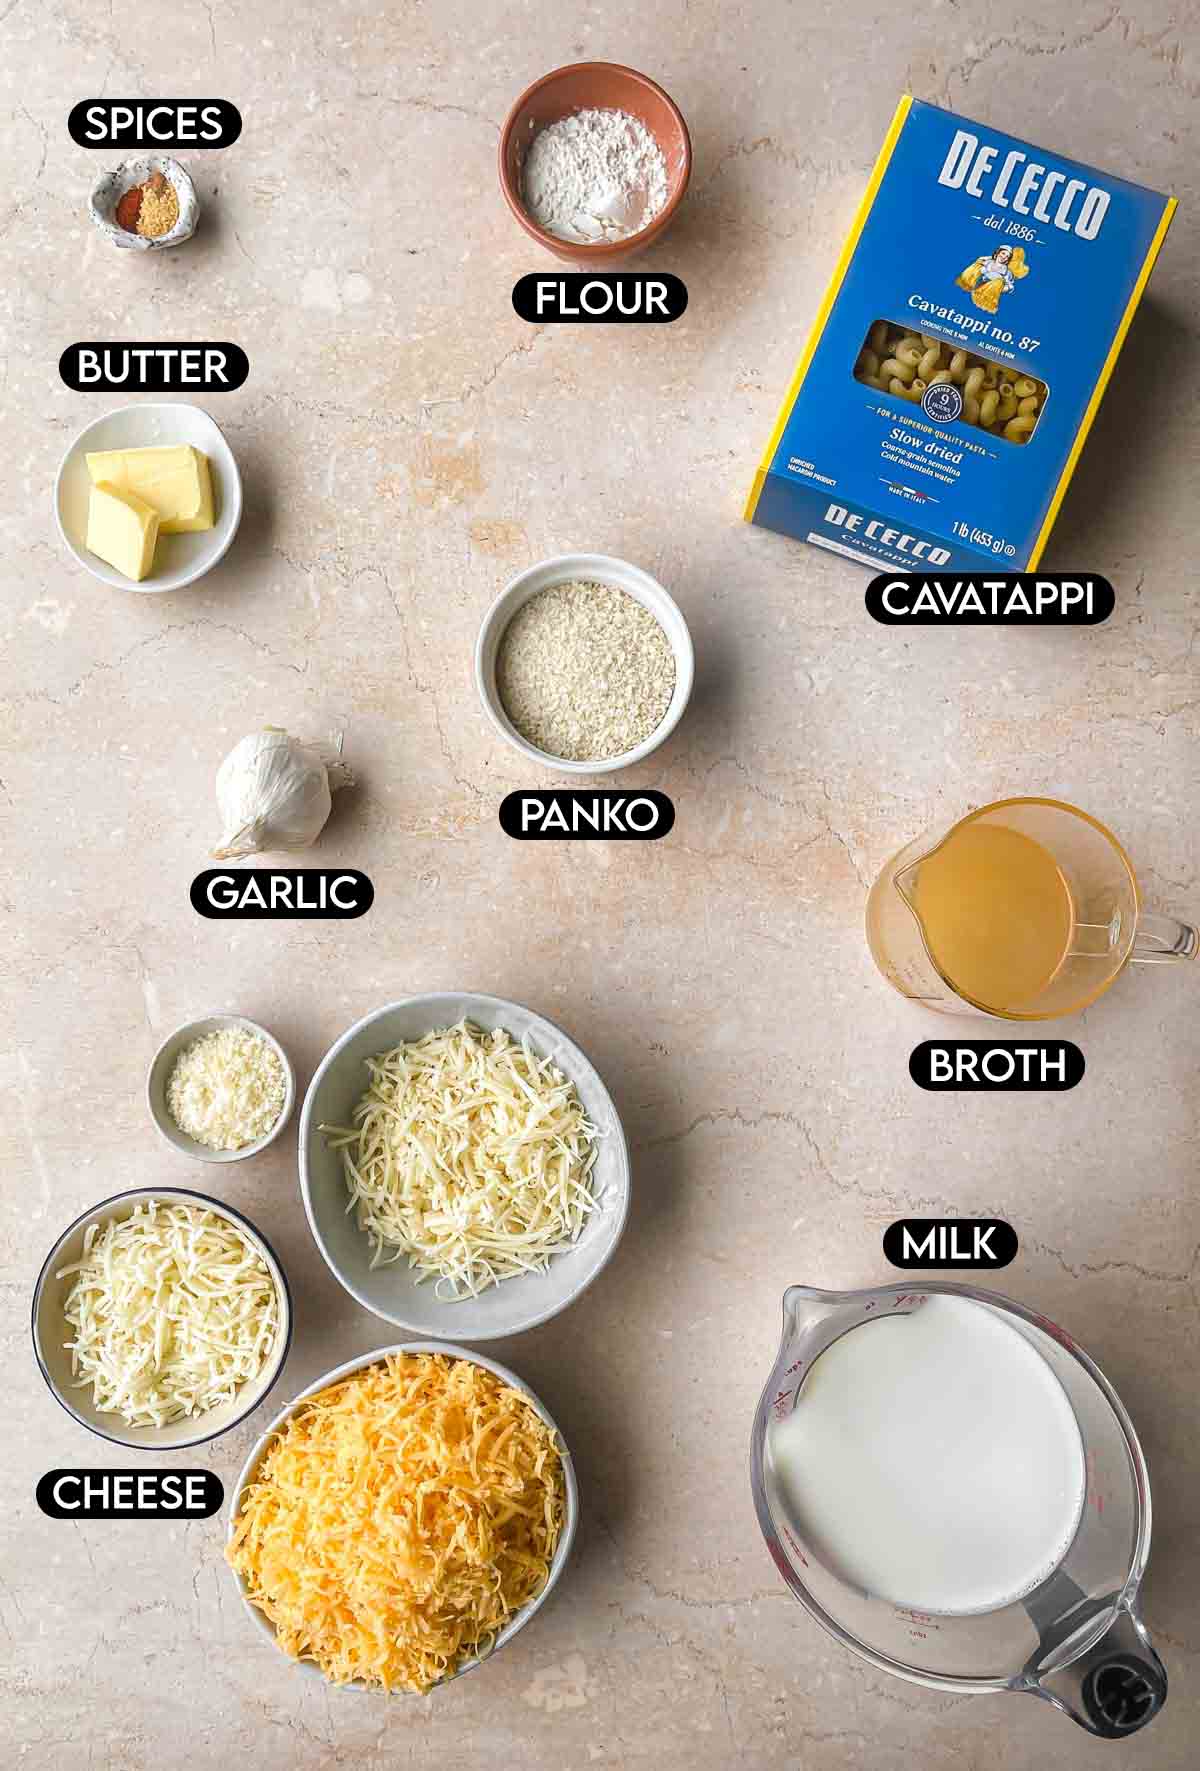 Labeled ingredients for Cavatappi Mac and Cheese: spices, butter, flour, cavatappi, garlic, Panko, cheese, broth, and milk.